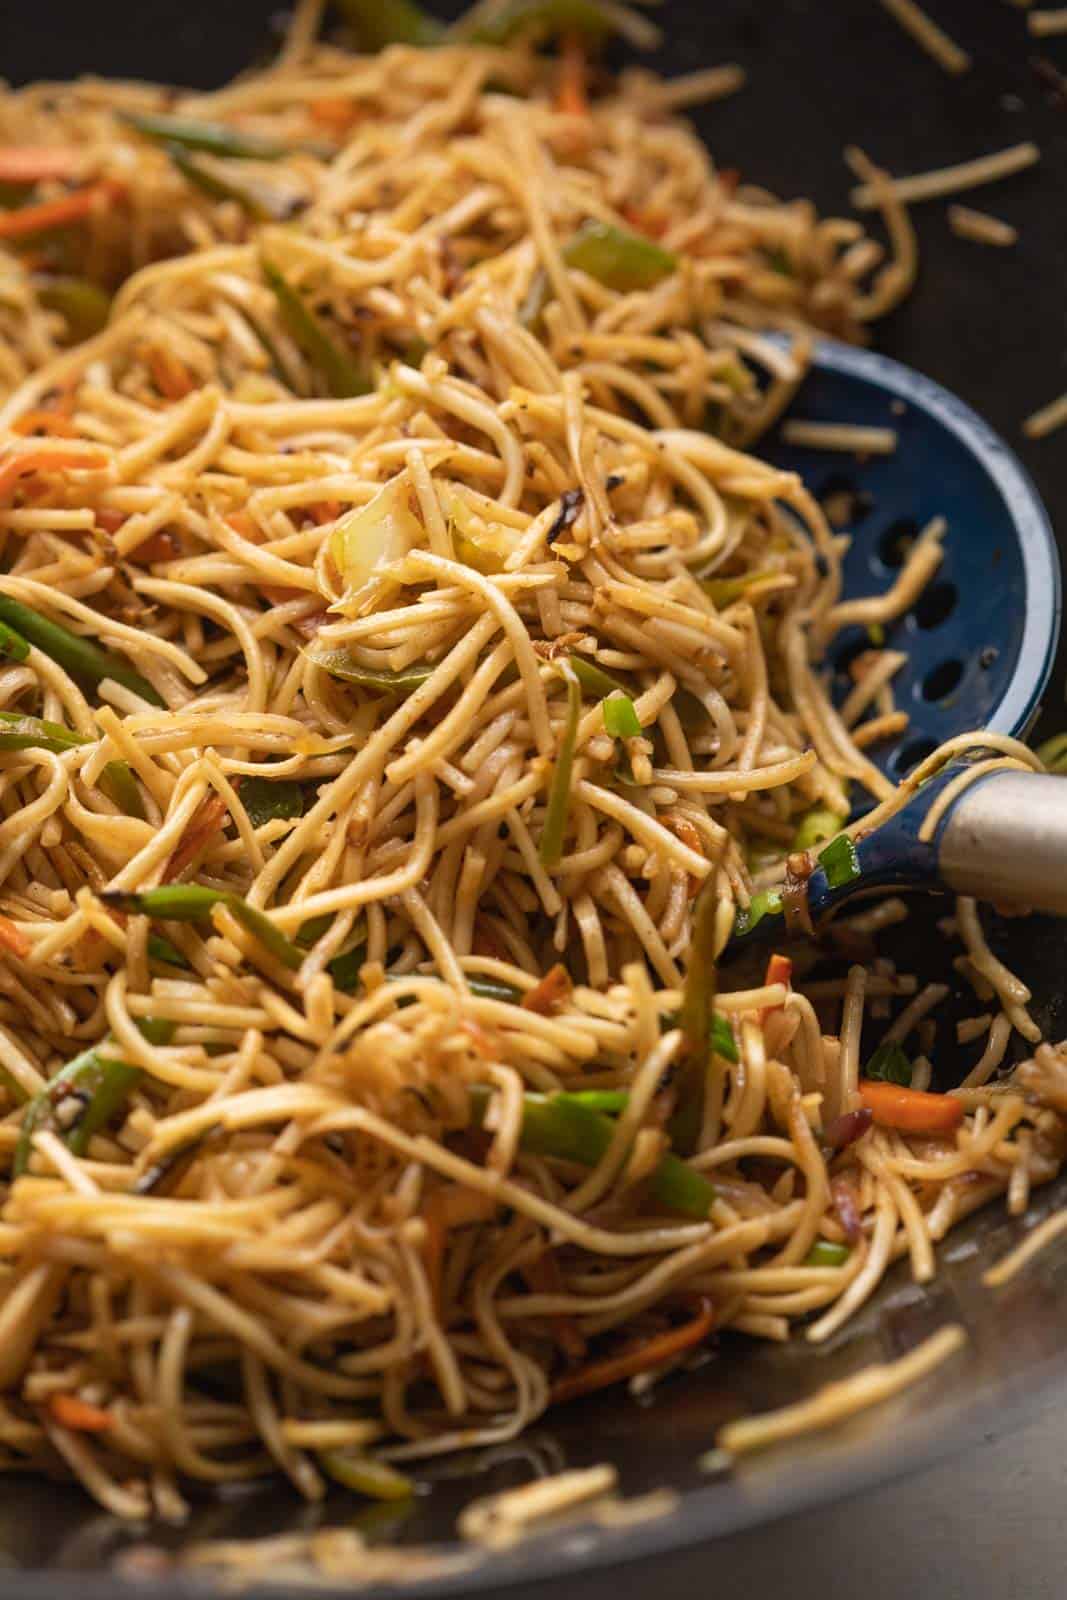 Hakka noodles pictures in the wok